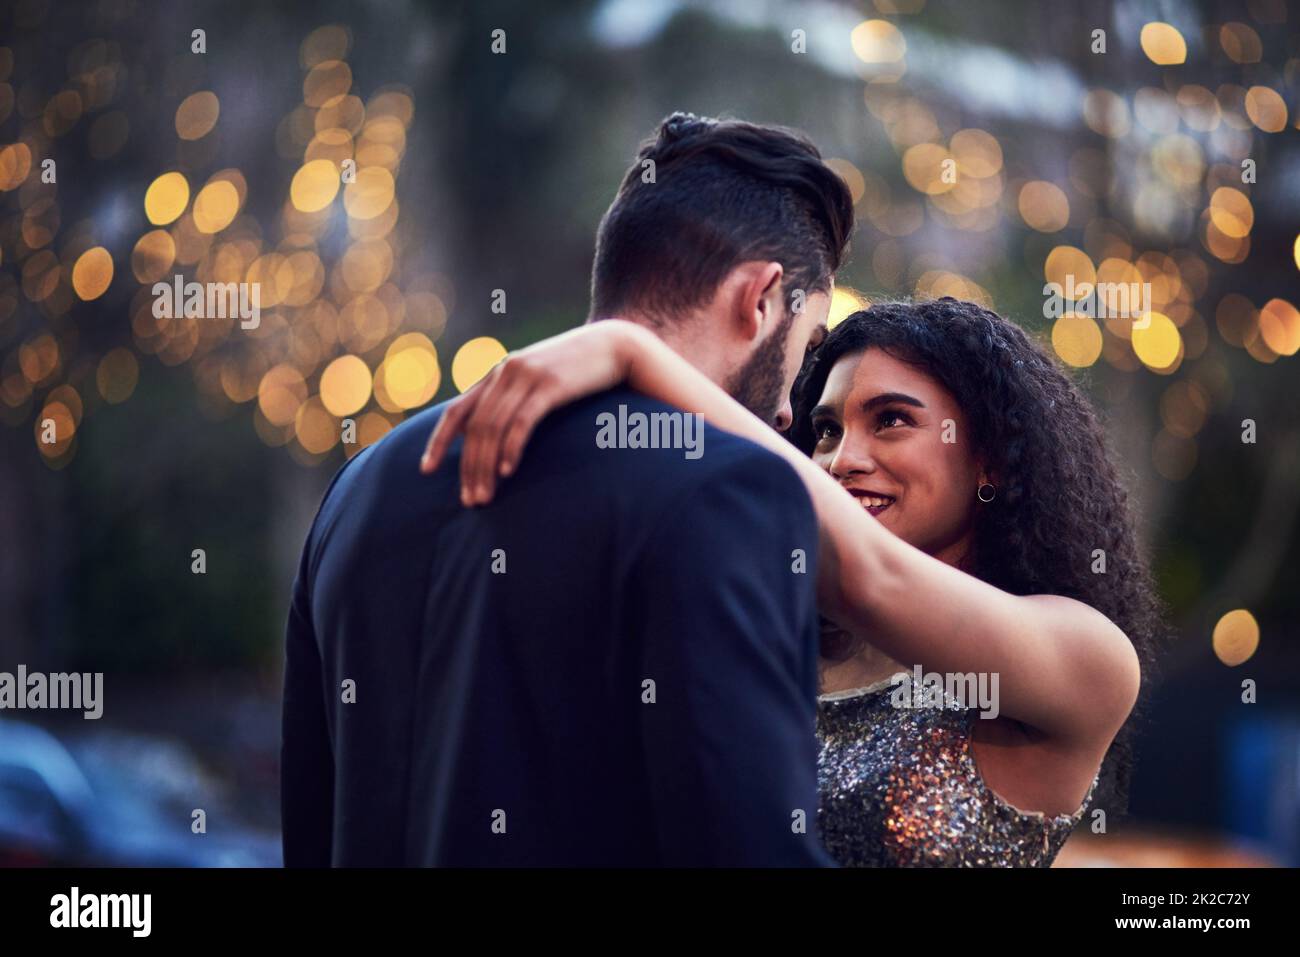 I love being around you. Shot of a cheerful young couple holding one another while looking into each others eyes outside at night. Stock Photo